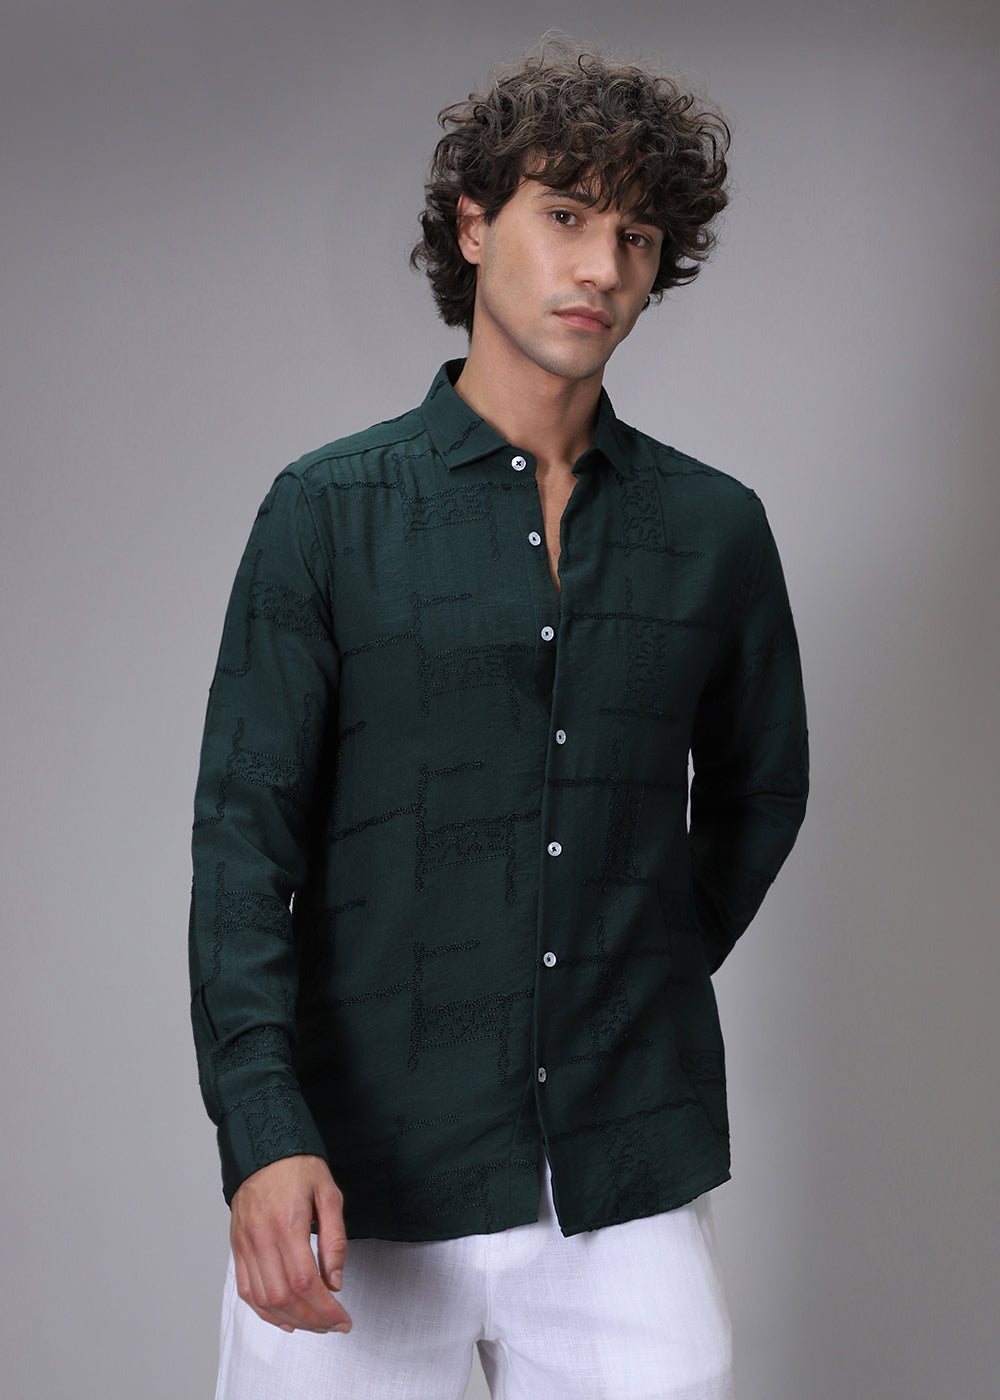 Teal Green Curvy Embroidery Shirt